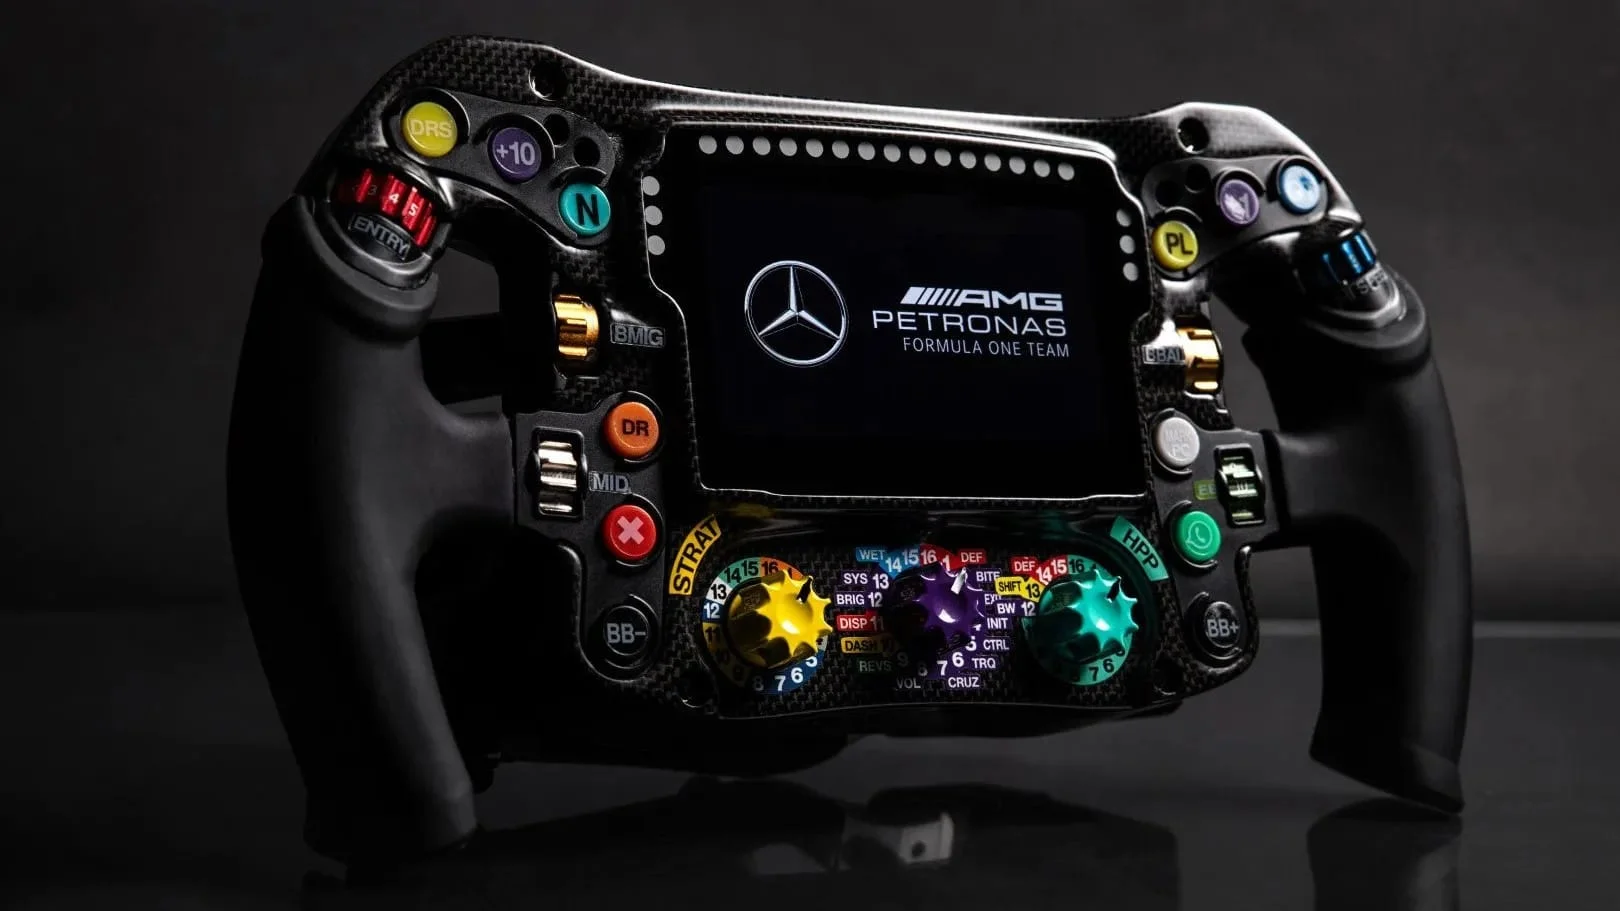 The game steering wheel came out like in Formula 1. It costs fabulous money